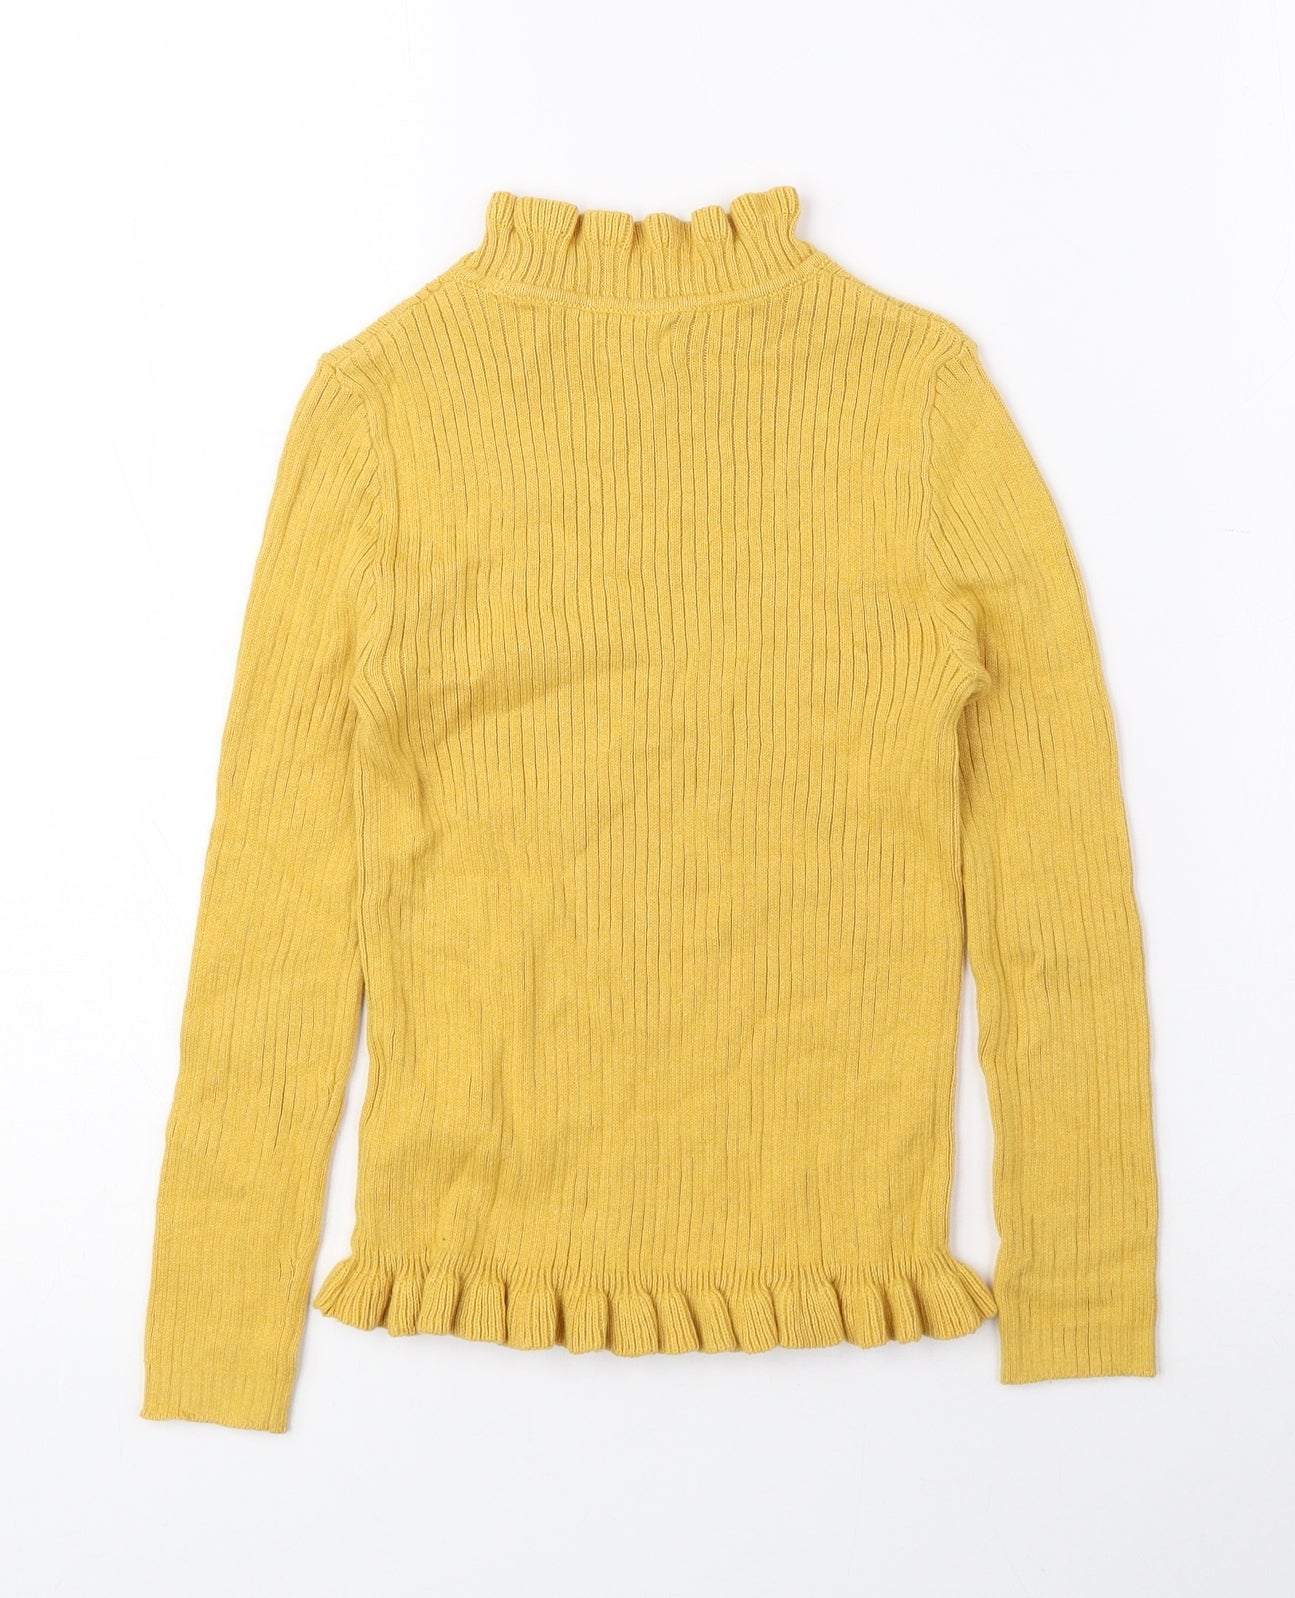 F&F Girls Yellow High Neck 100% Cotton Pullover Jumper Size 5-6 Years Pullover - Ribbed